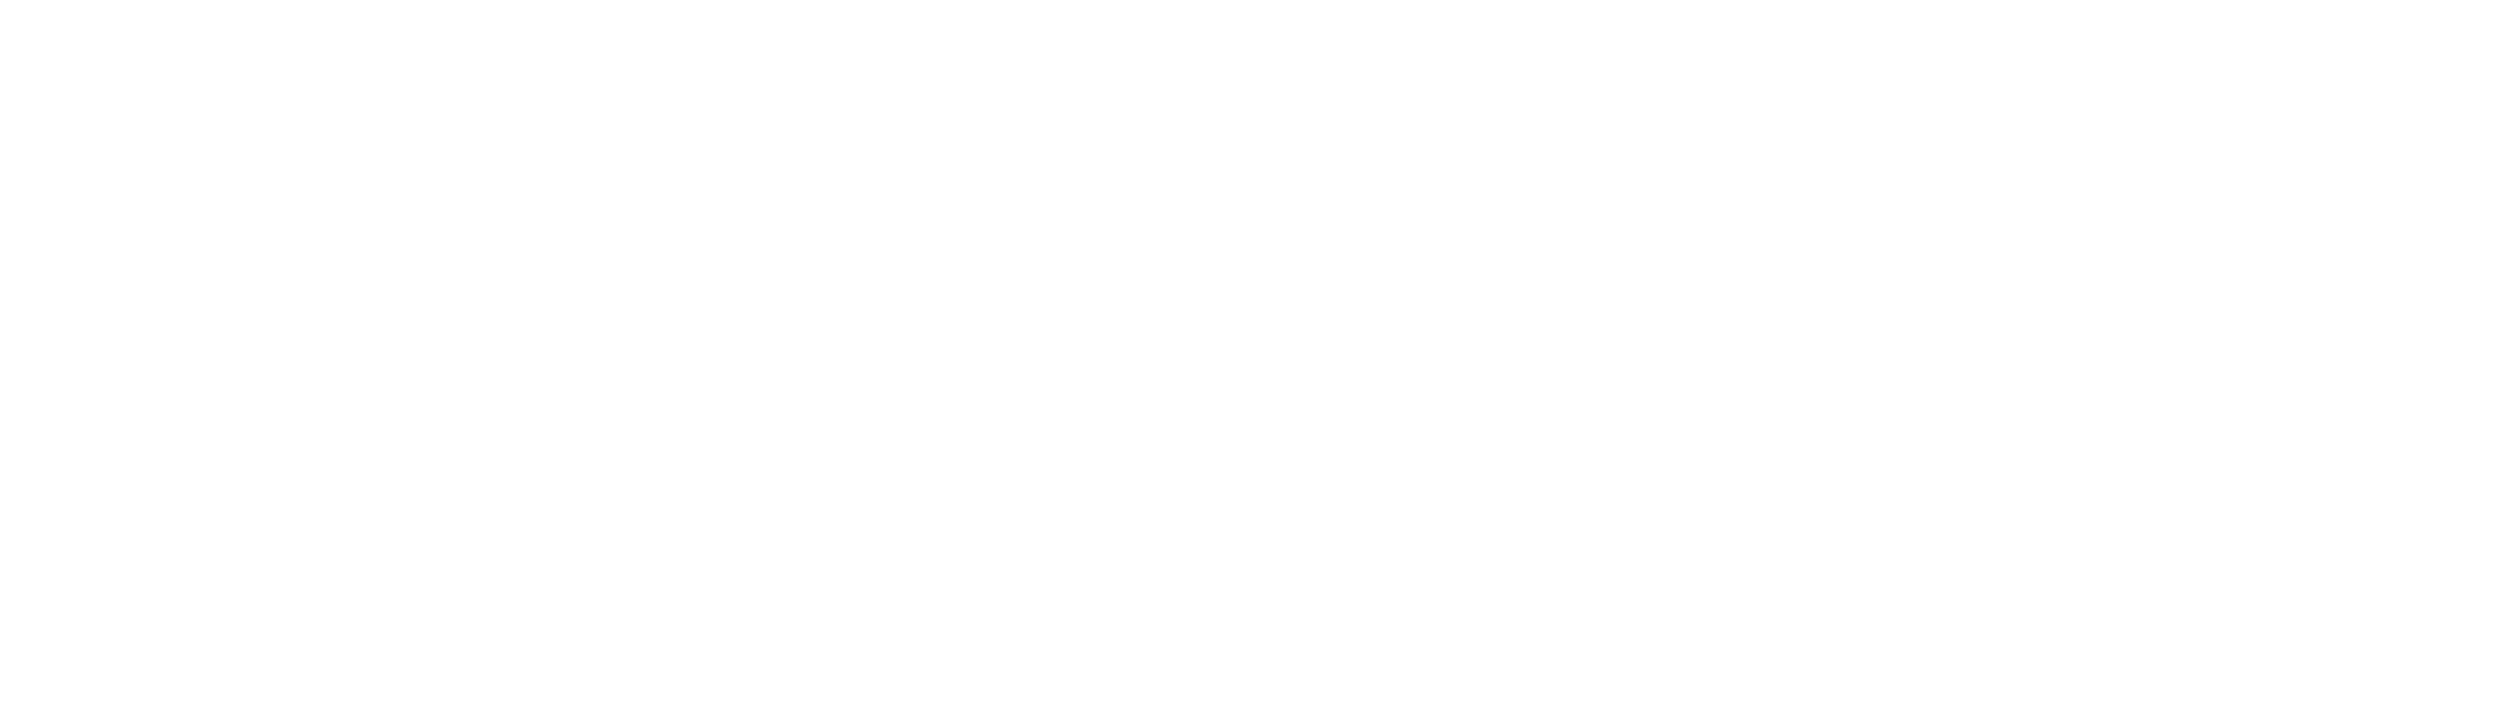 OFFICIALSELECTION-AMIENS.png